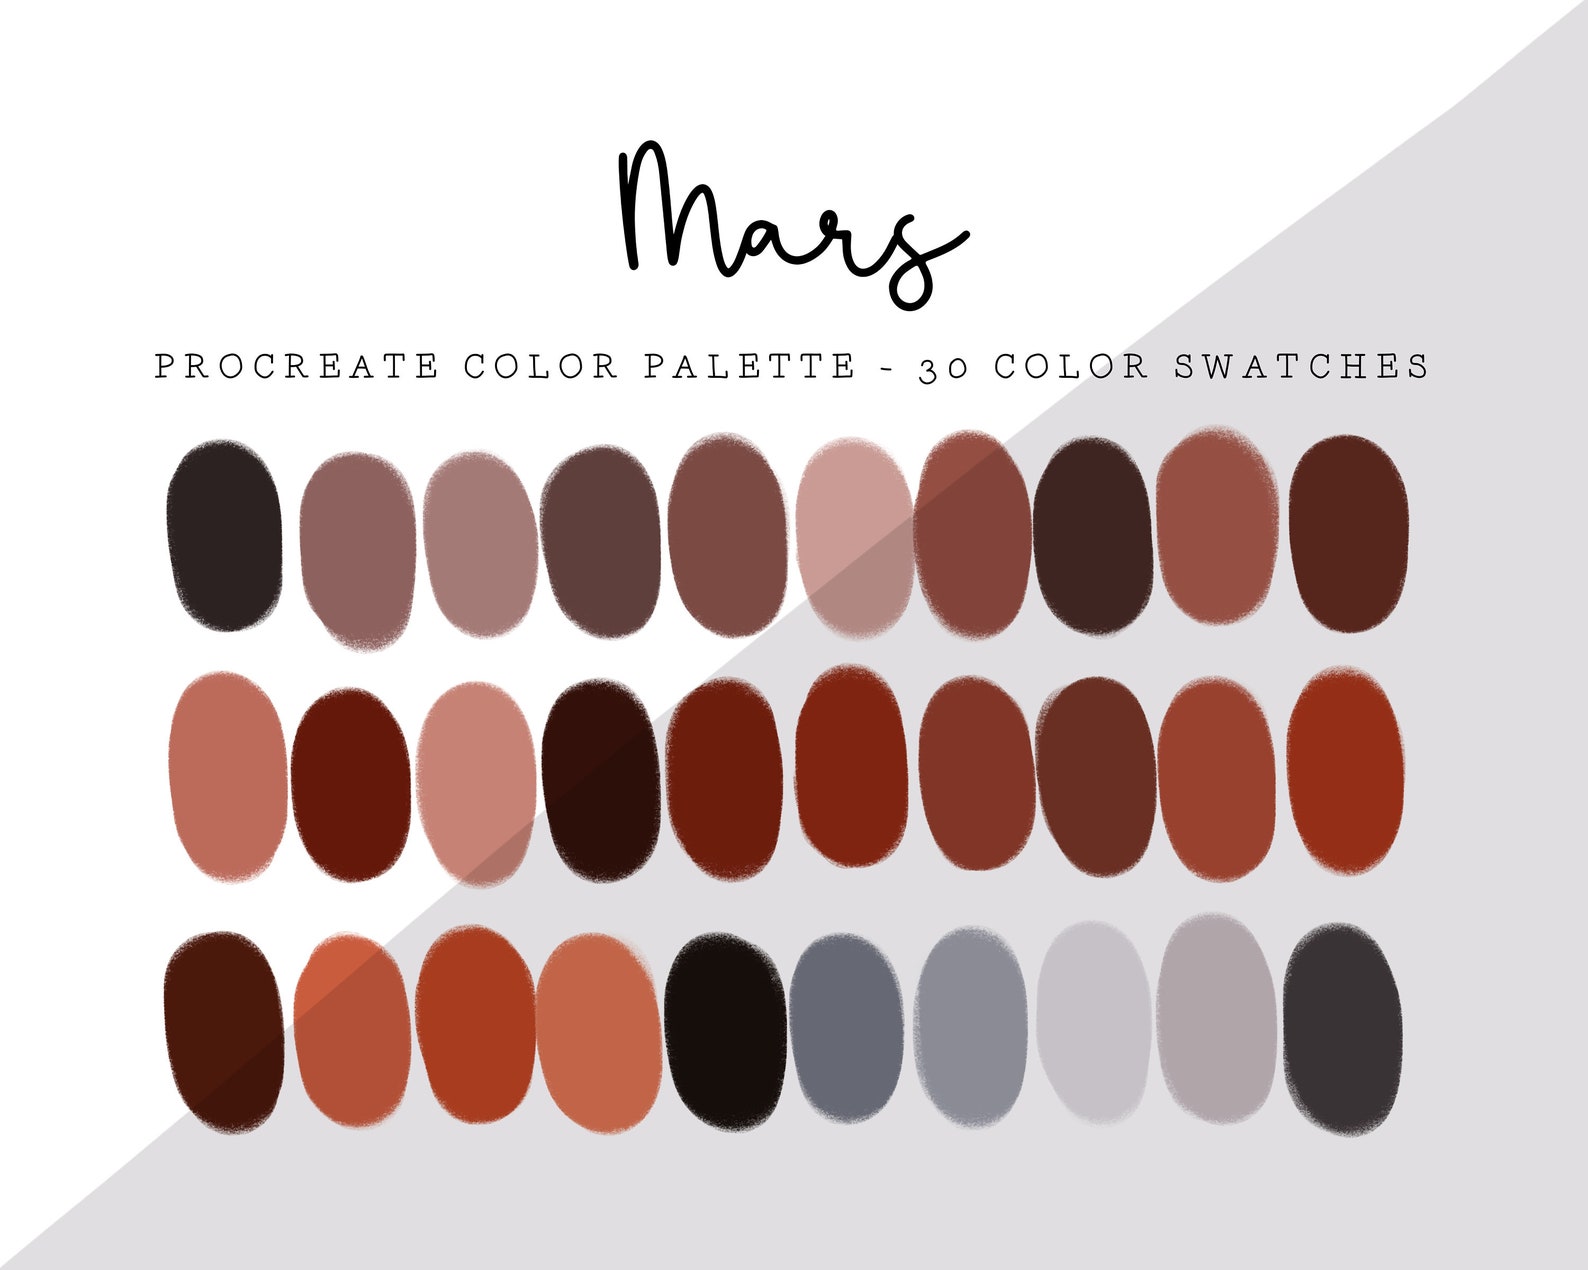 Mars Procreate Color Palette Color Swatches iPad Lettering | Etsy